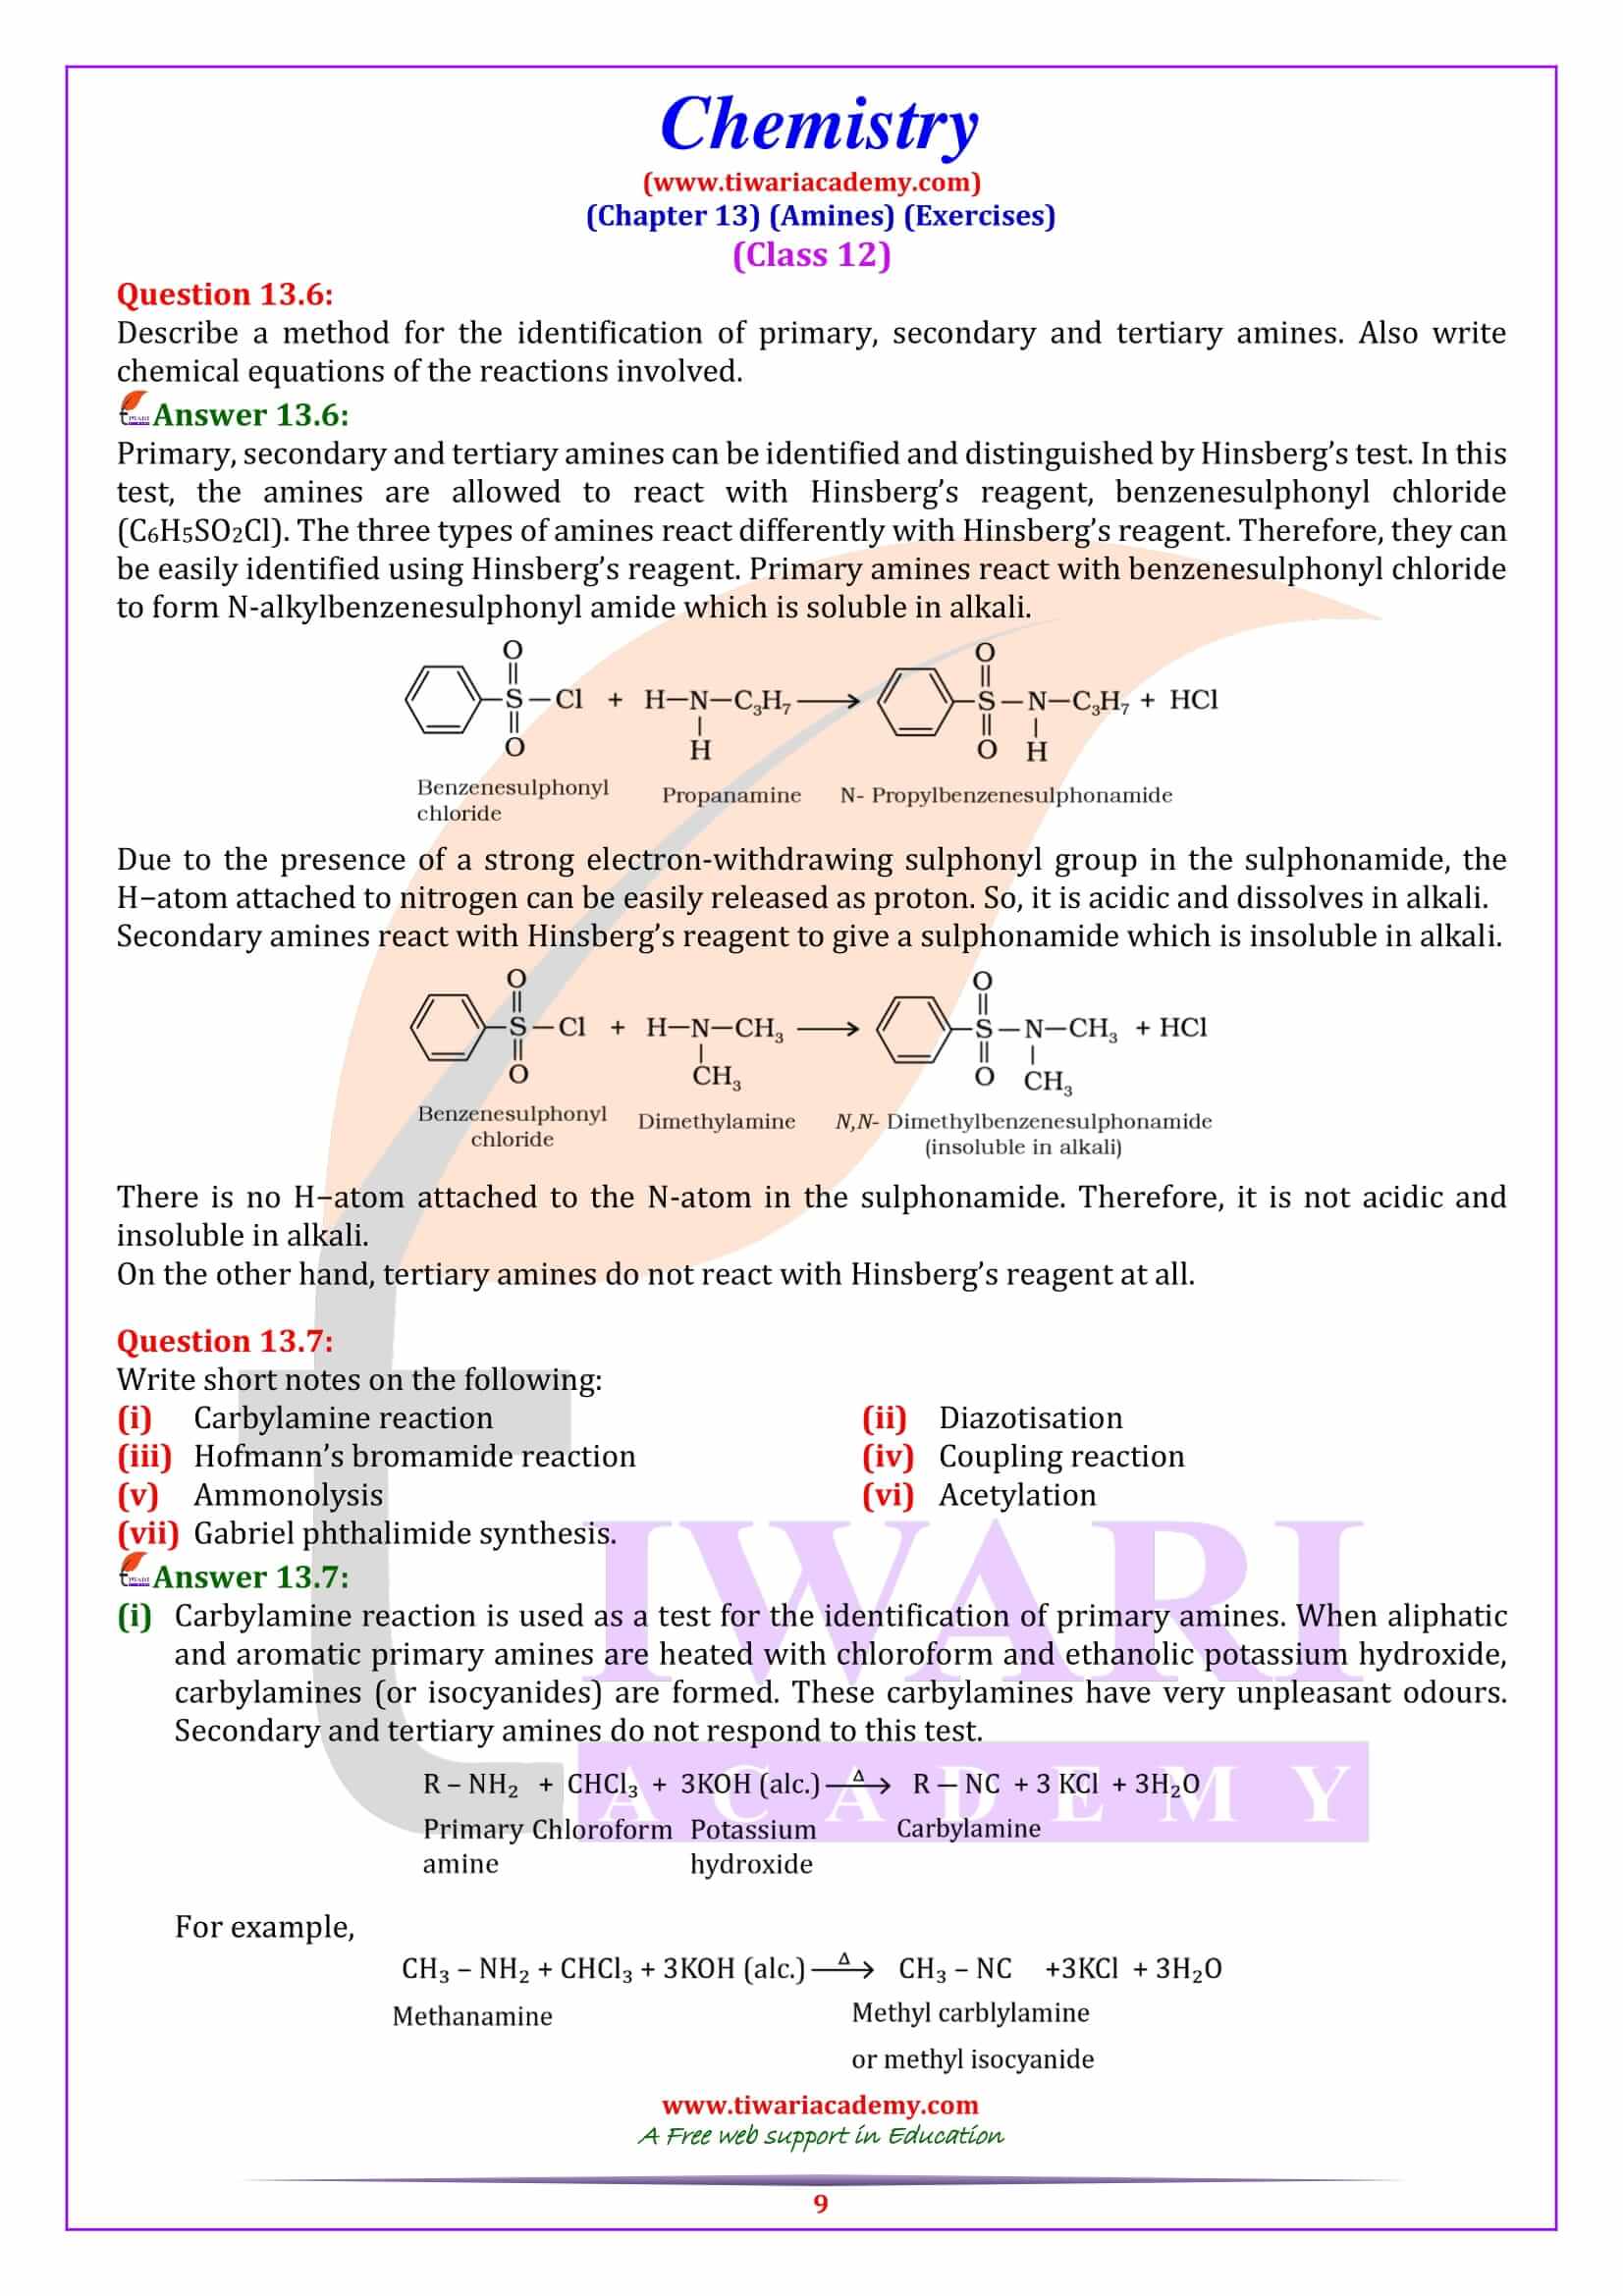 NCERT Solutions for Class 12 Chemistry Chapter 13 extra Questions